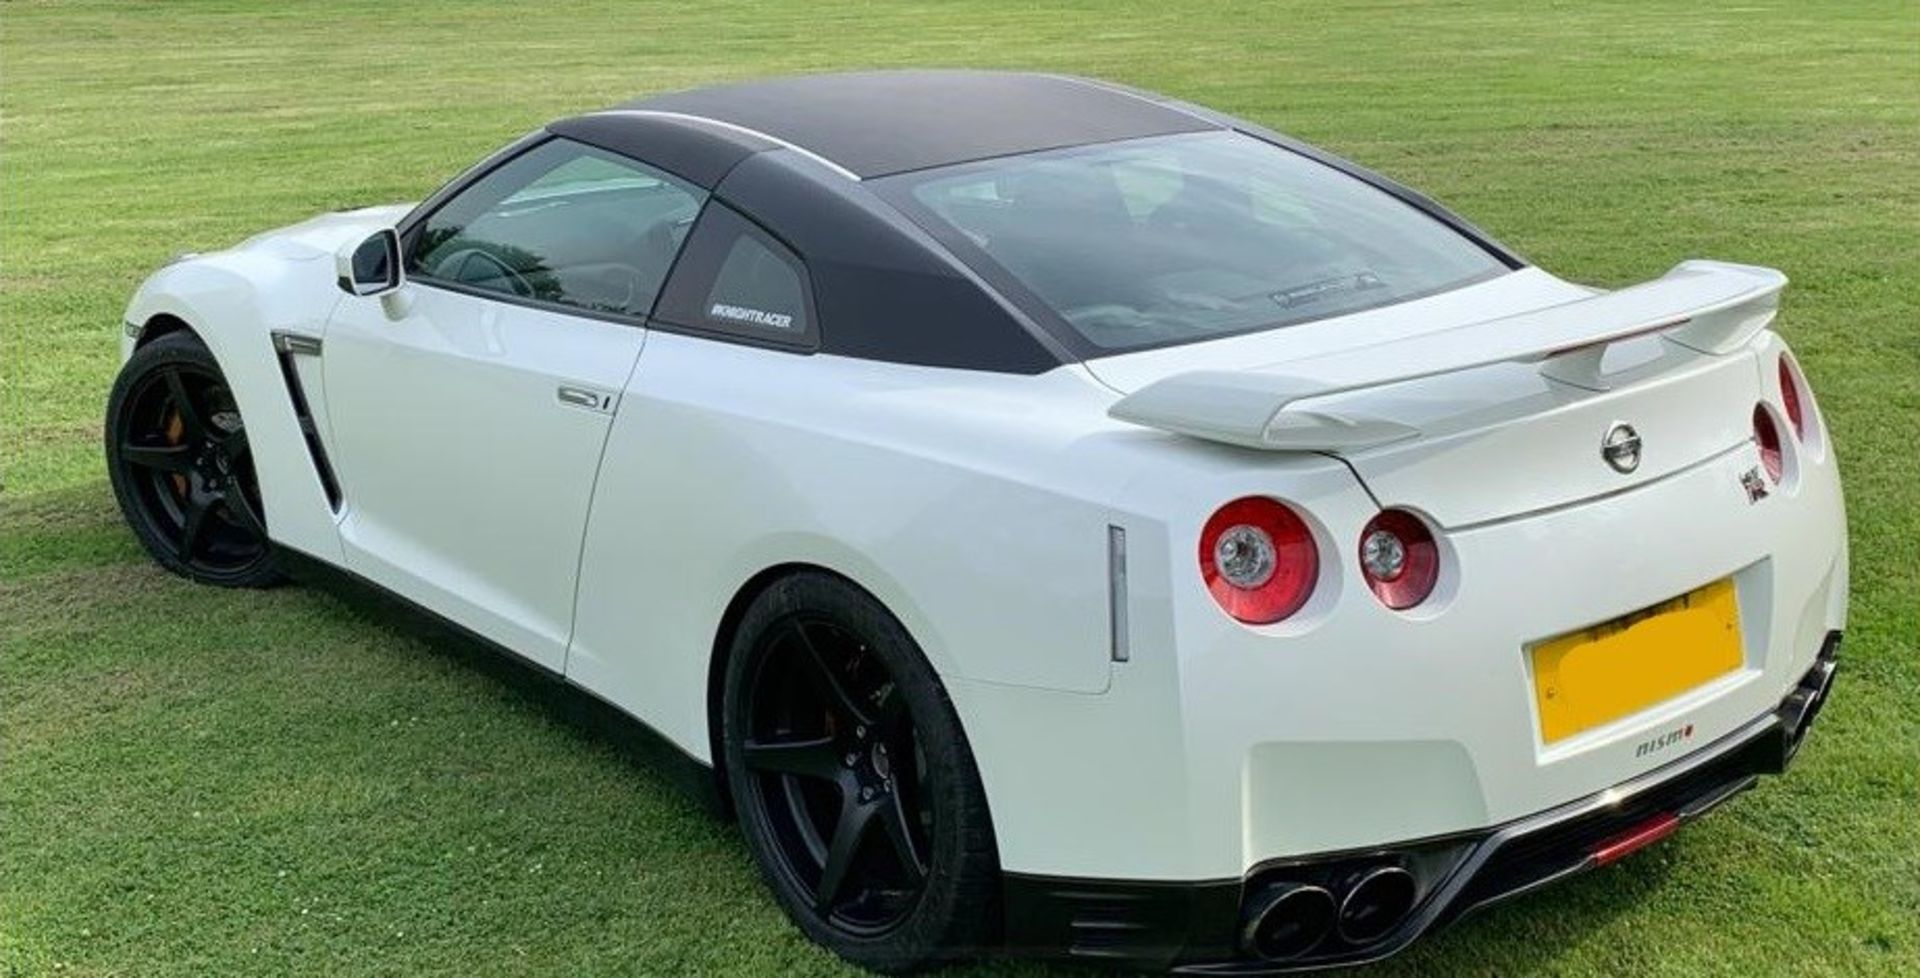 2011/11 REG NISSAN GT-R R35 PREMIUM EDITION S-A ONE FORMER KEEPER FROM NEW 22K MILES - WARRANTED! - Image 6 of 22